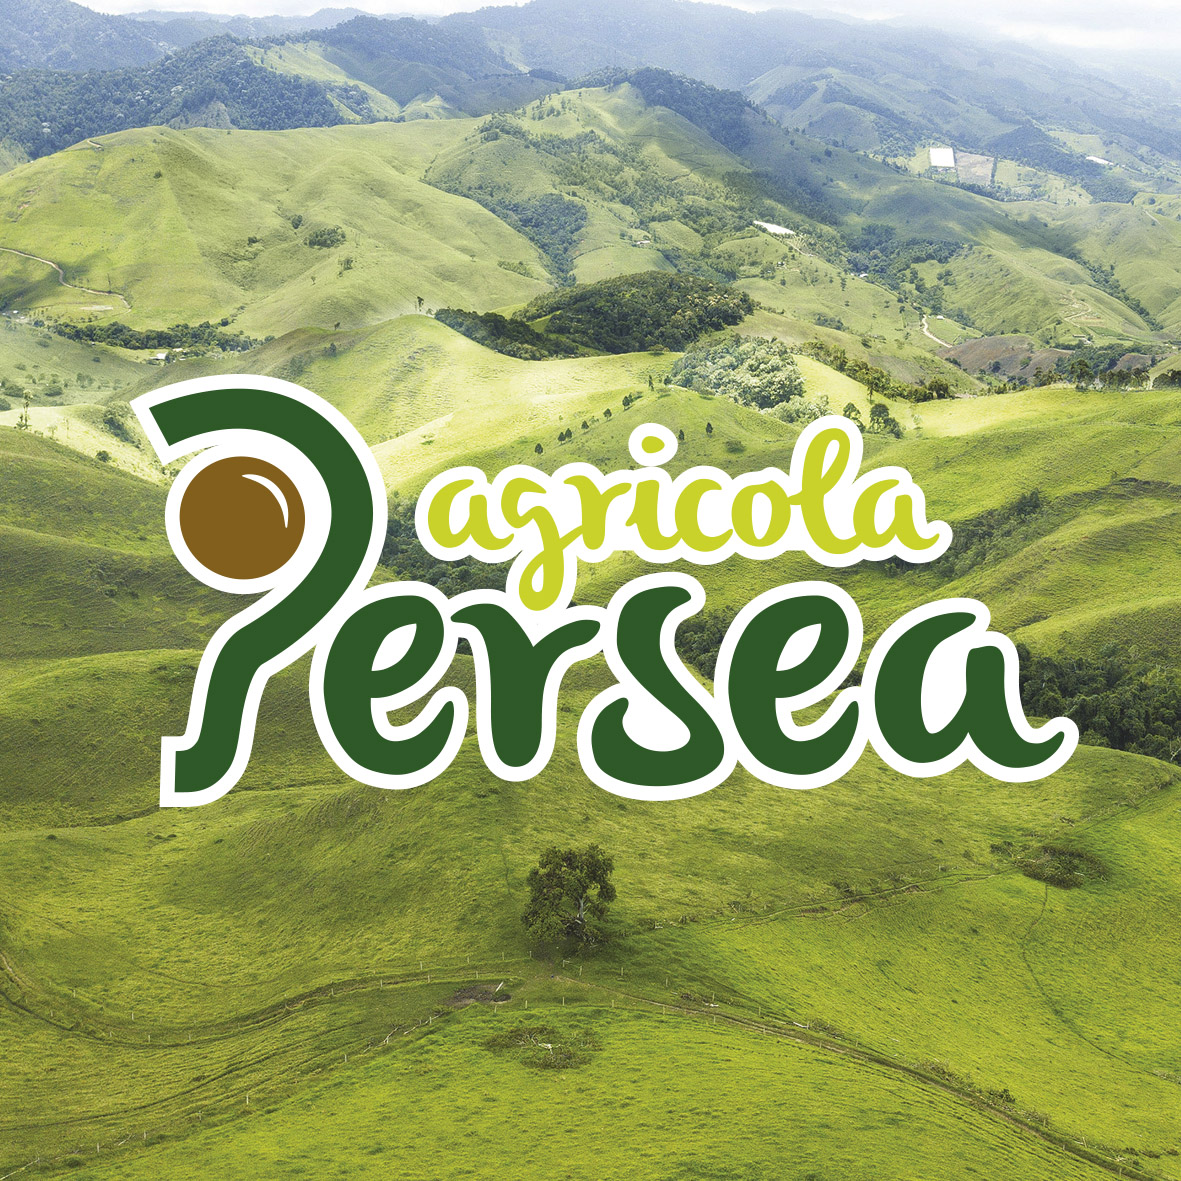 Agricola Persea: Battaglio & C.I.Tropical together for a new avocado production